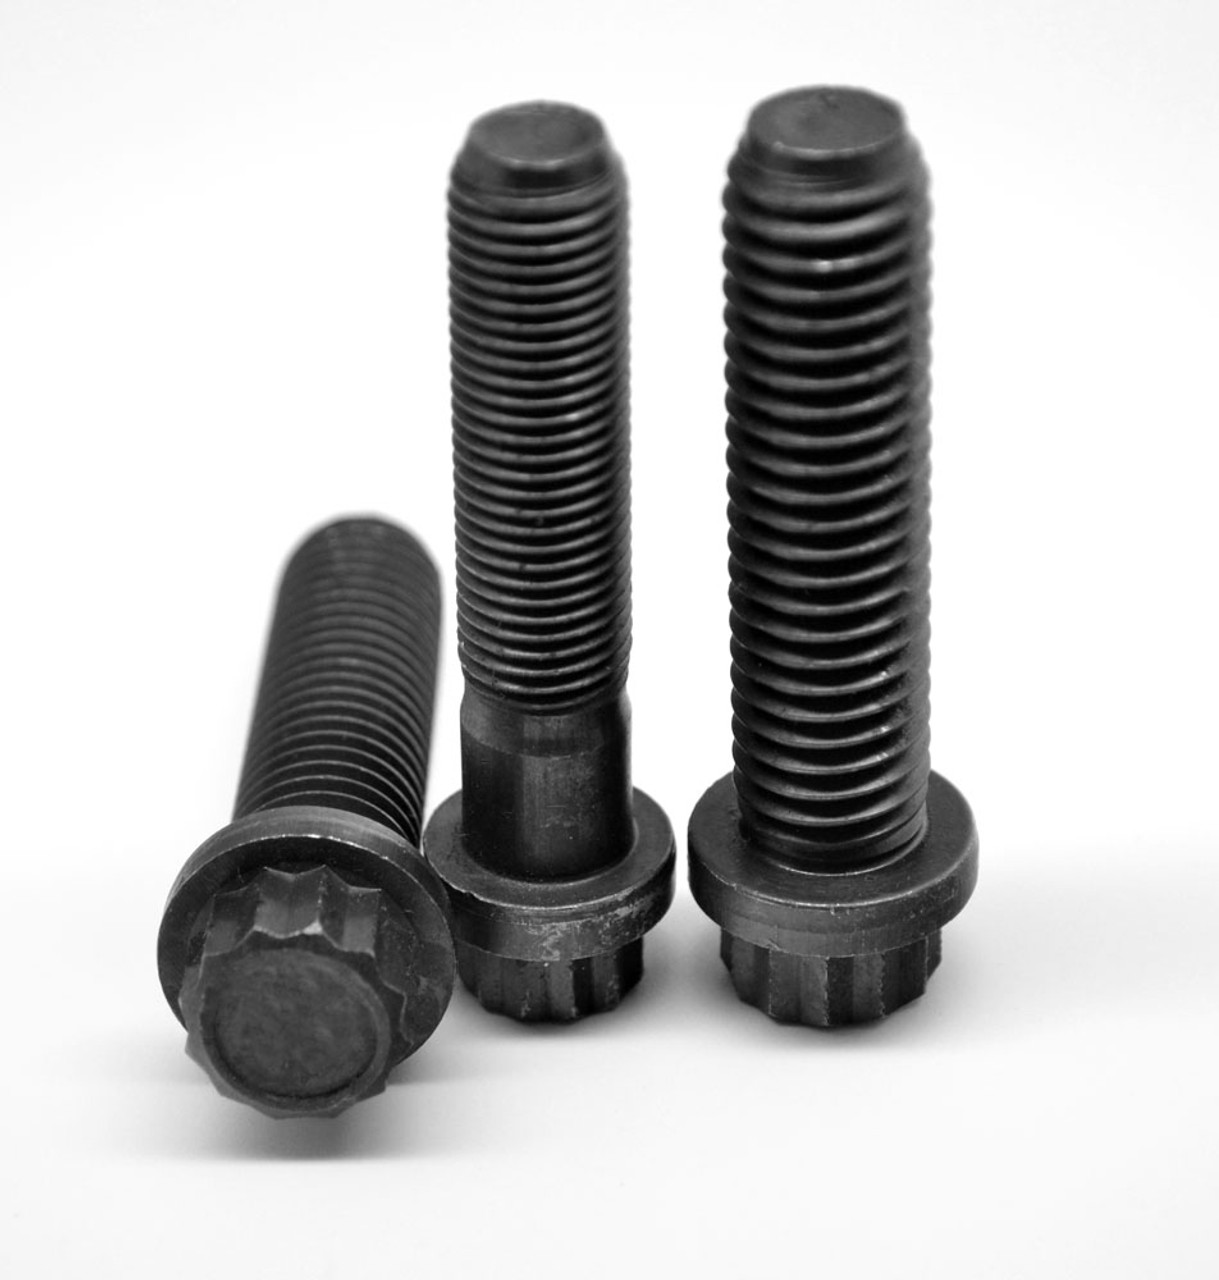 7/8-9 x 2 Coarse Thread 12-Point Flange Screw Alloy Steel Thermal Black Oxide